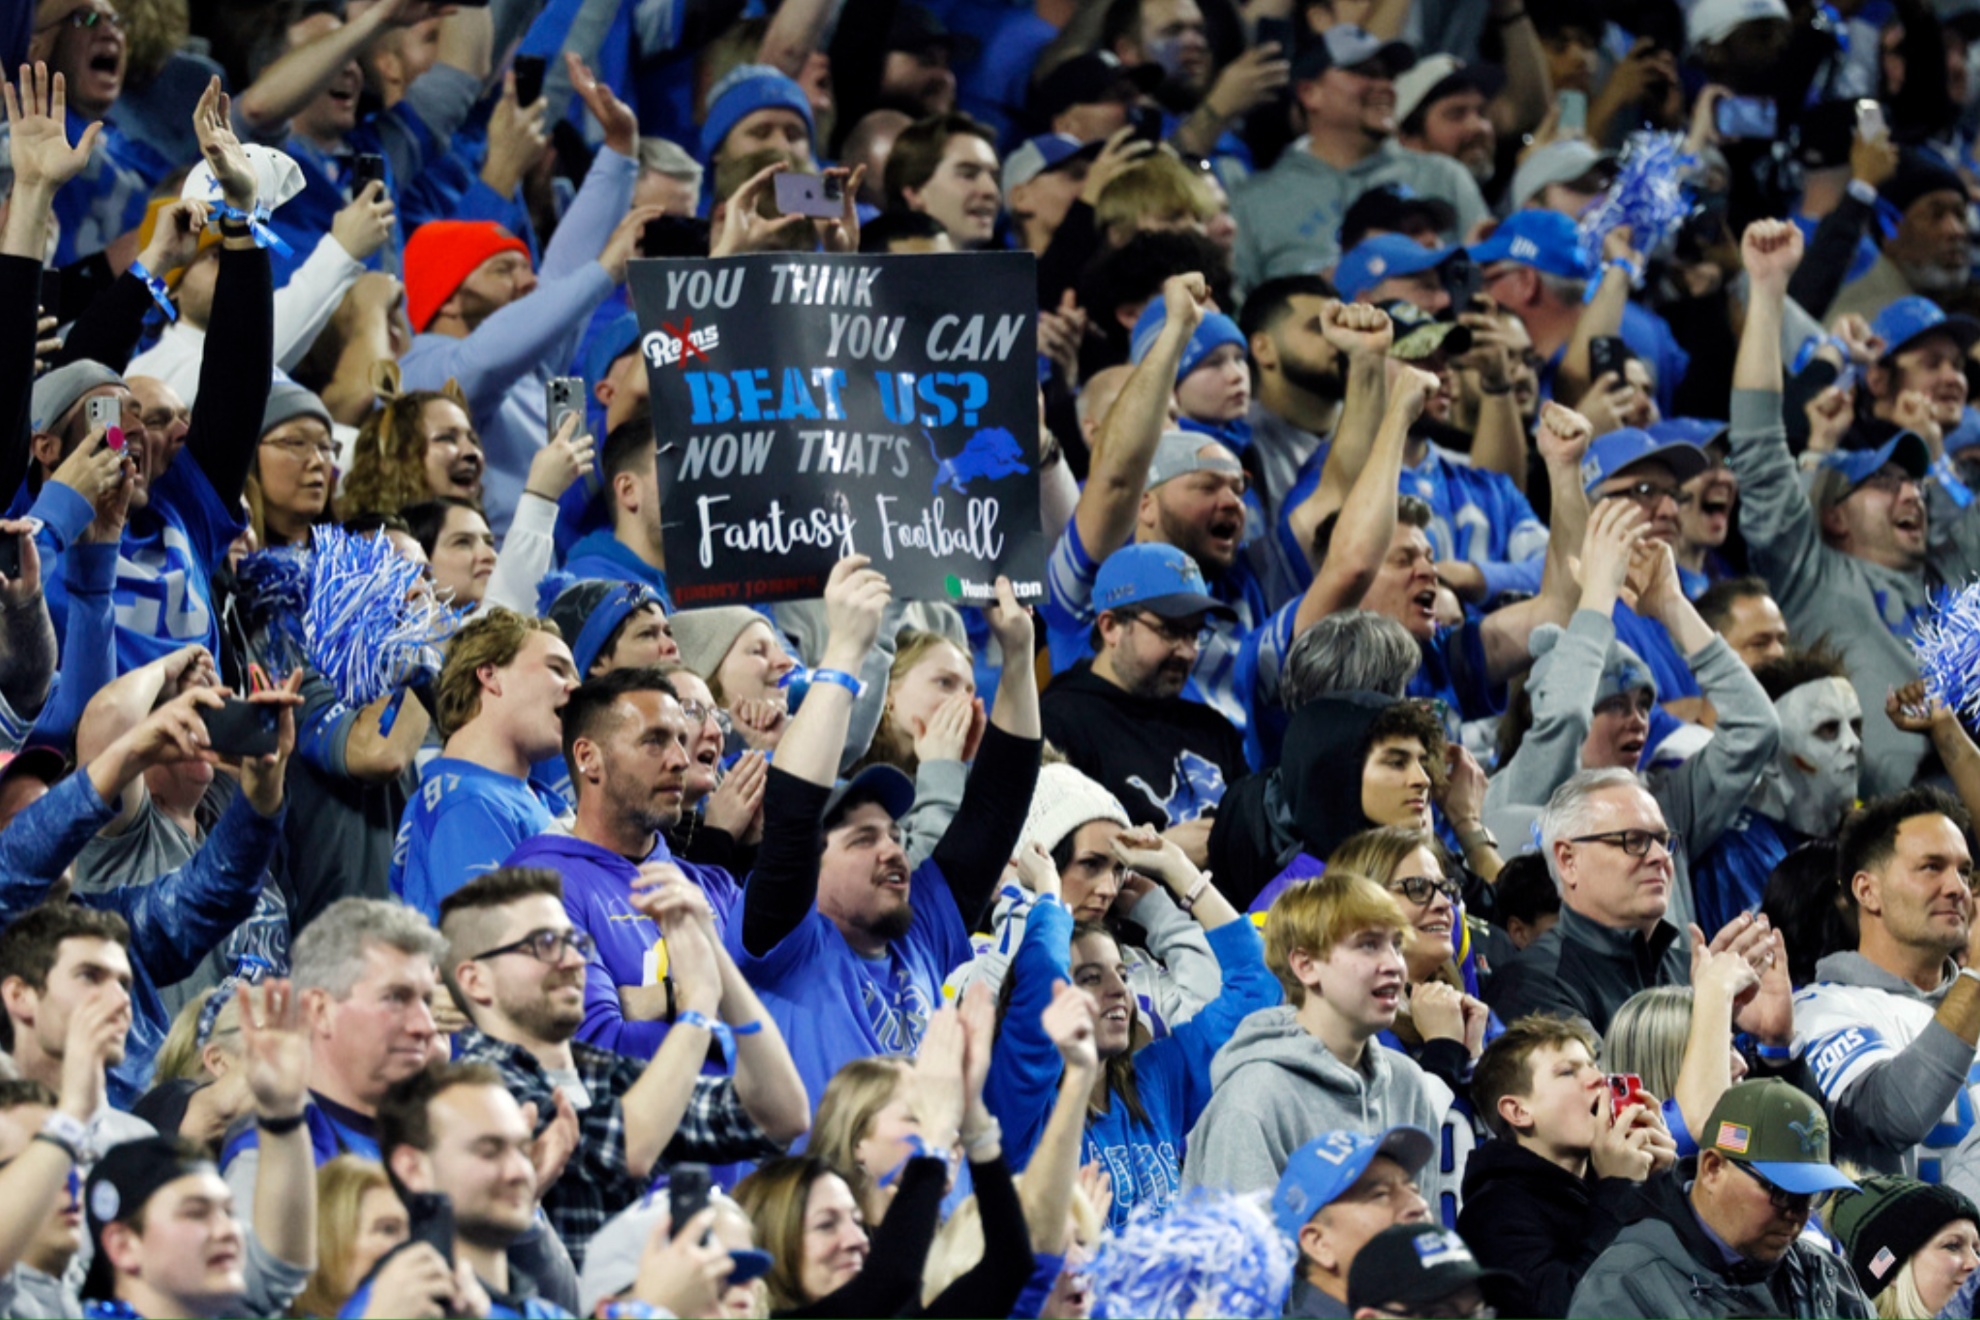 The Detroit Lions fans are some of the loudest among NFL fan bases